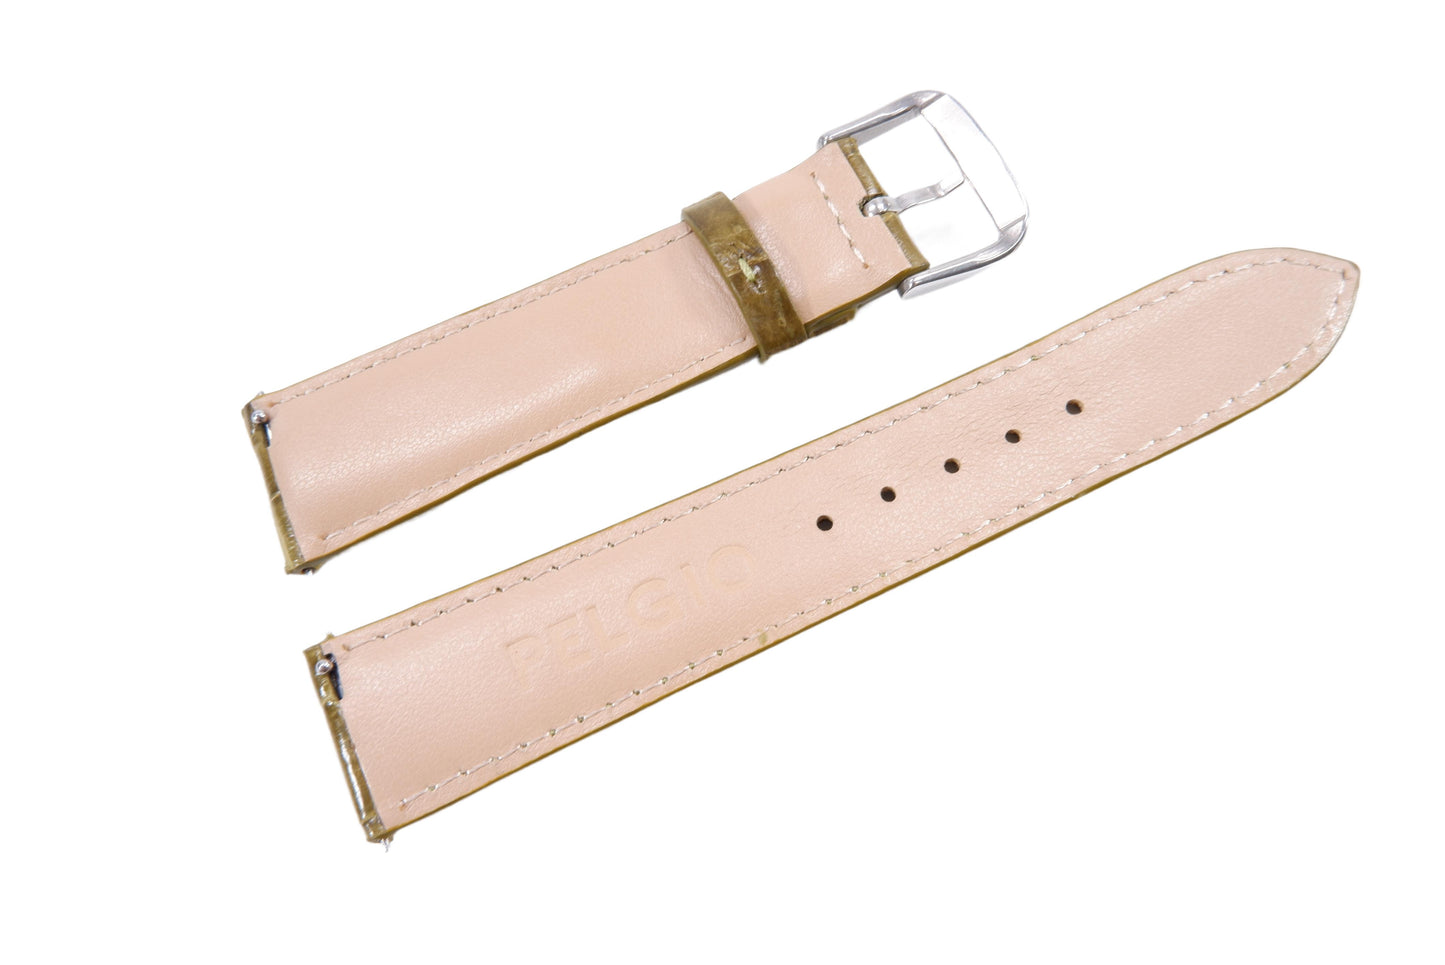 Genuine Crocodile Belly Skin Leather Quick Release Watch Strap Green Band with Buckle